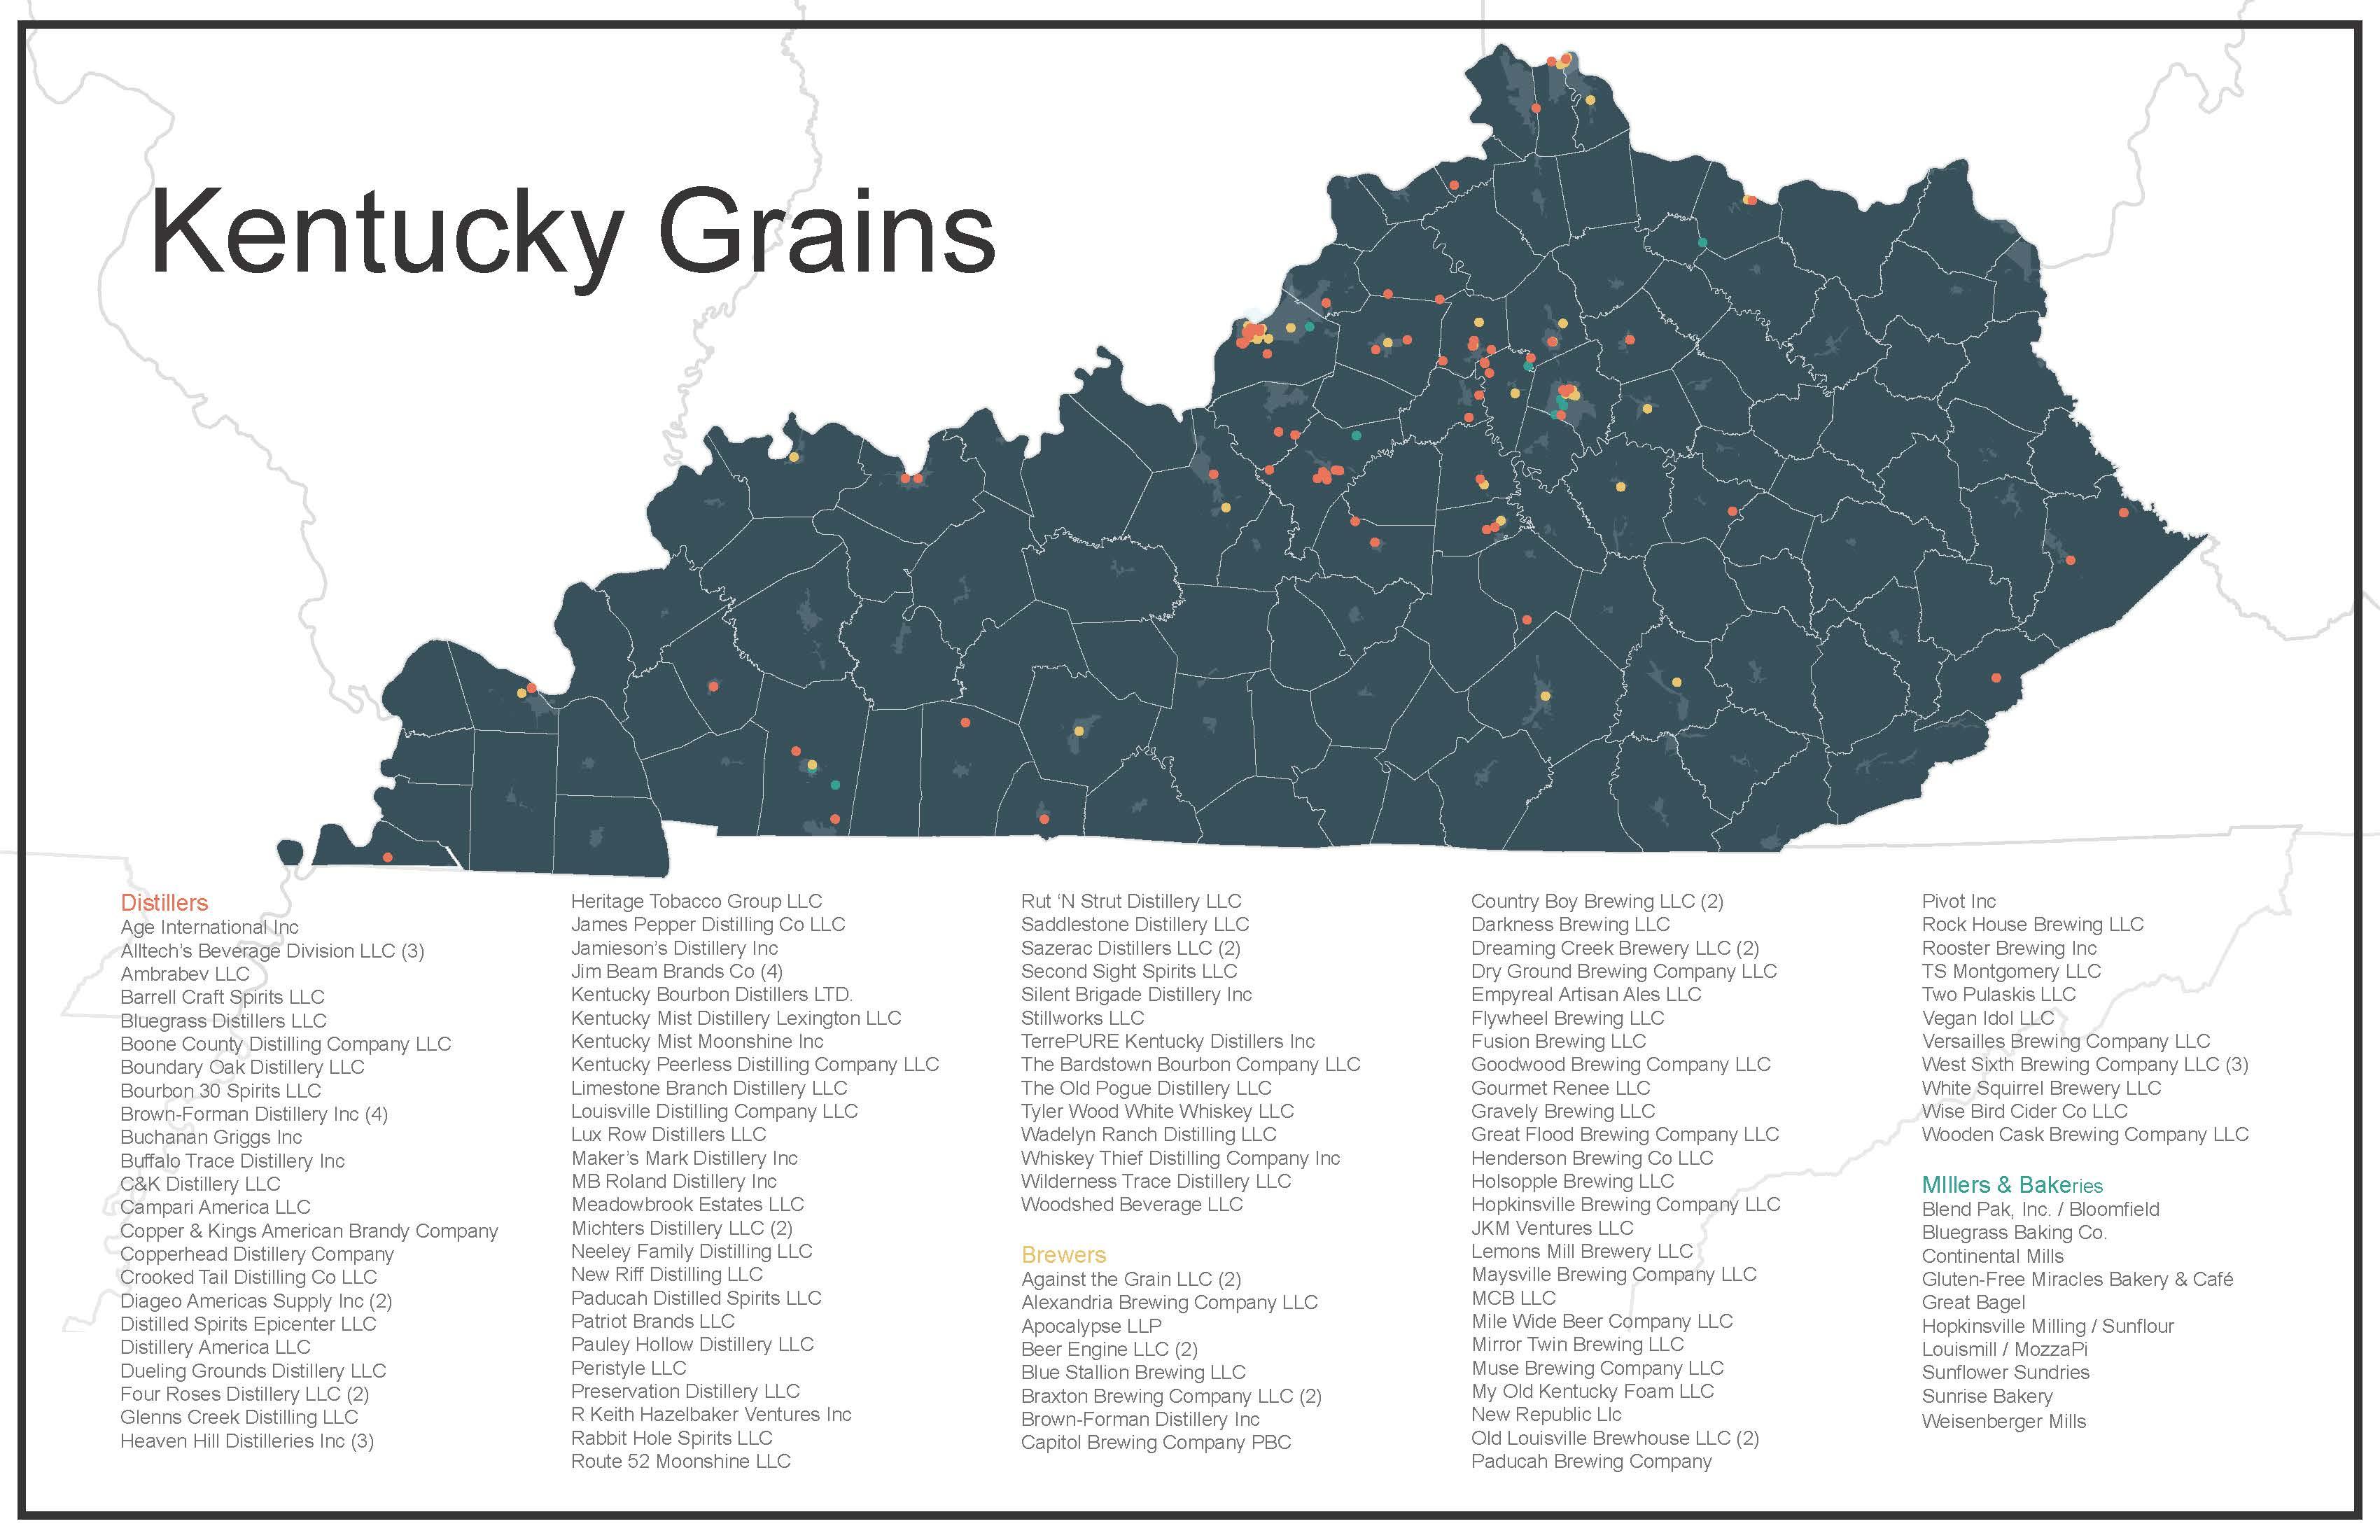 A map of local grain producers, processors, and other users in Kentucky